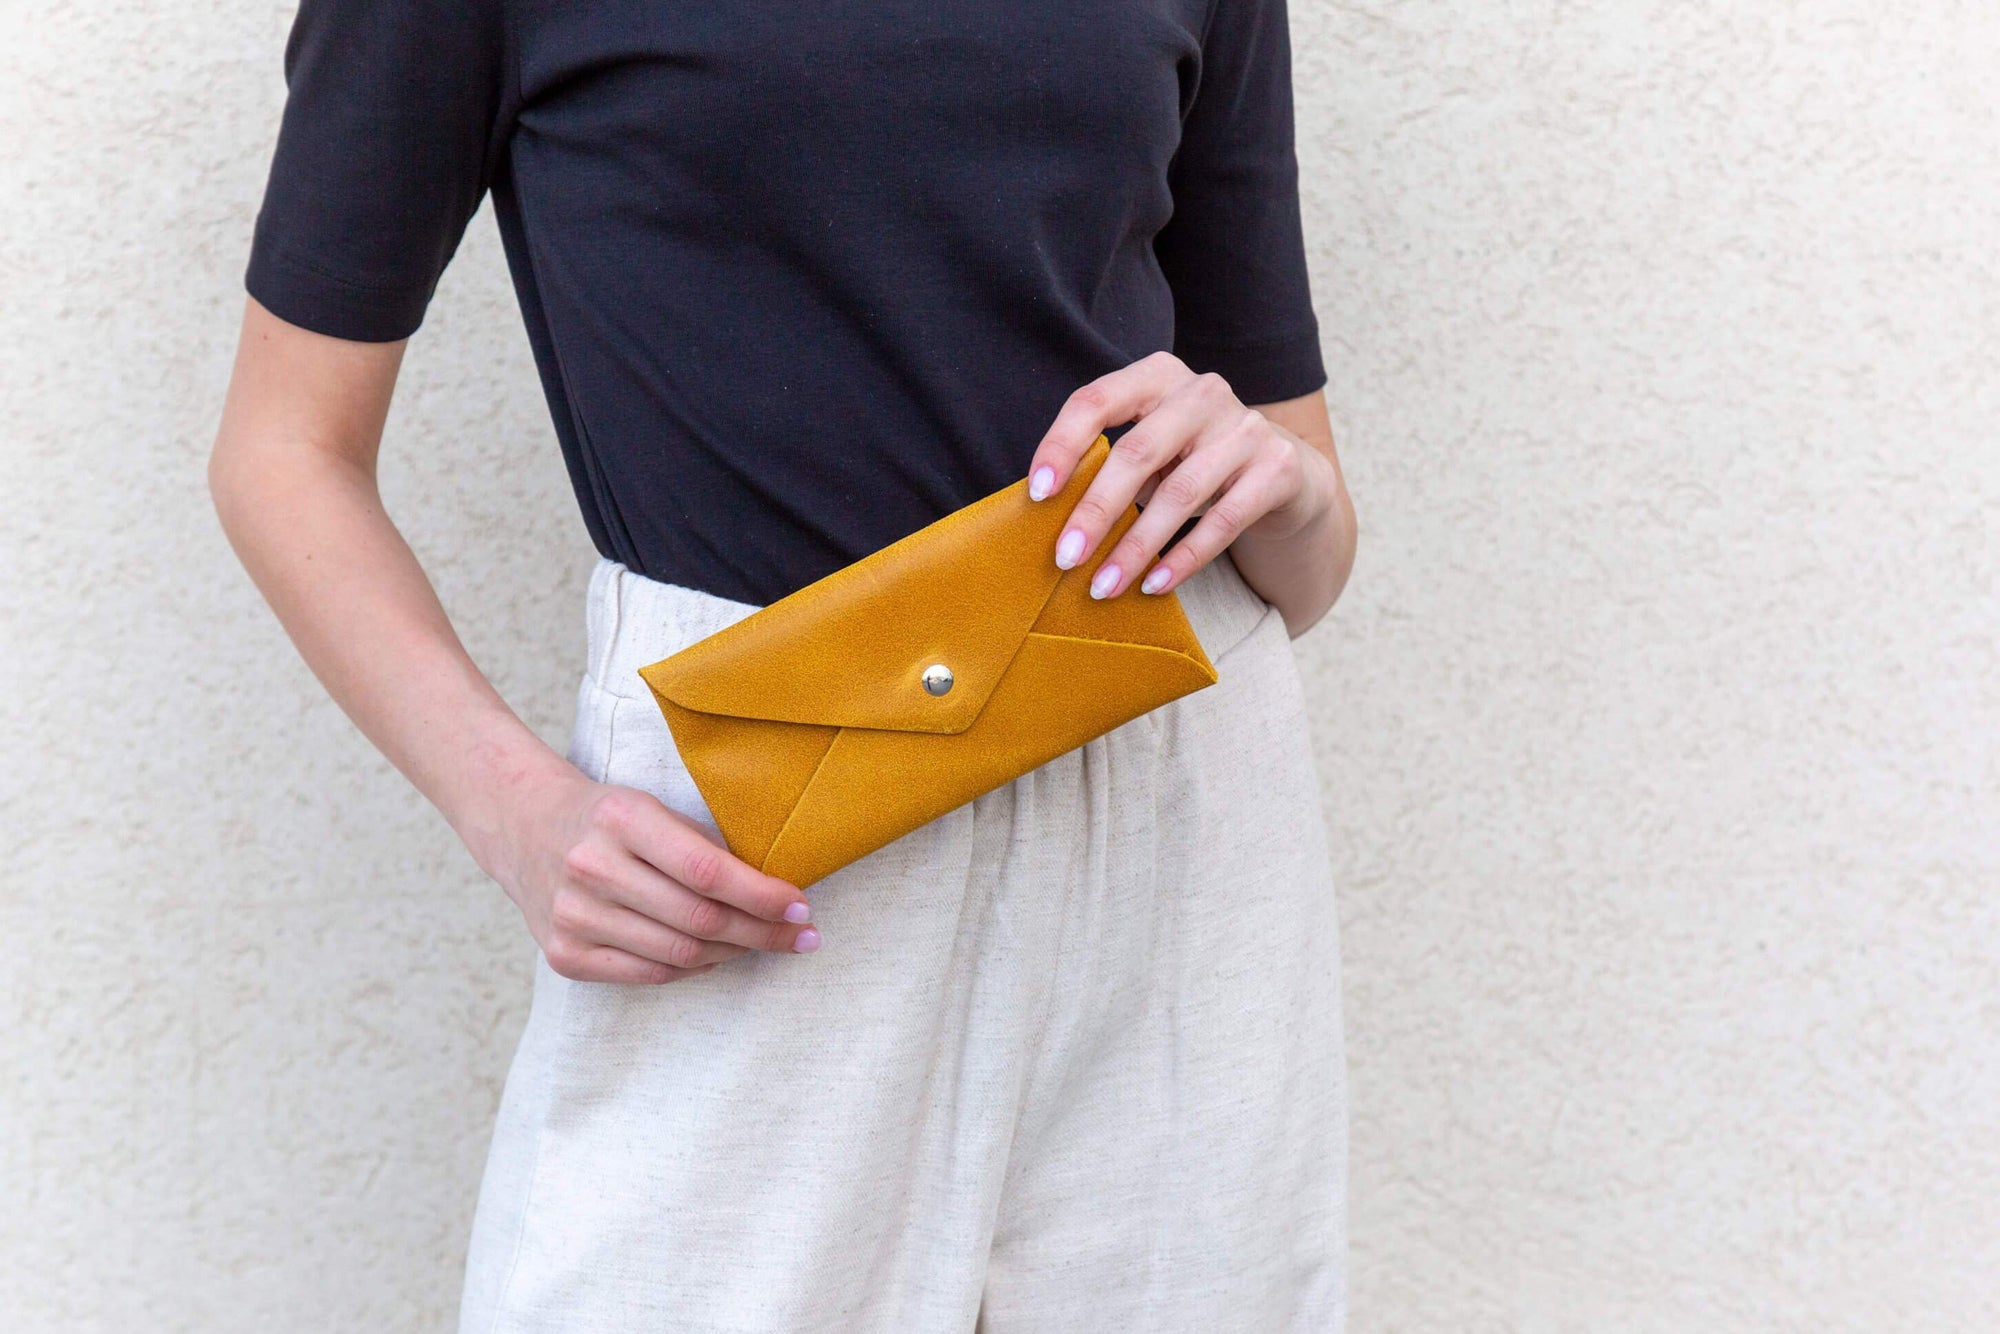 Leather Pouch, Small Purse Clutch Evening and Day Bag, Handmade Minimalis Leather Gift for Women and Men, Cell Phone Bag , personalized leather gift, leather envelope pouch, women leather pouch, small gift, gift under $50, leather clutch, gift for her, leather pouch, small case, phone pouch, envelope purse, mayko bags, Wallet Pouches||Mustard||